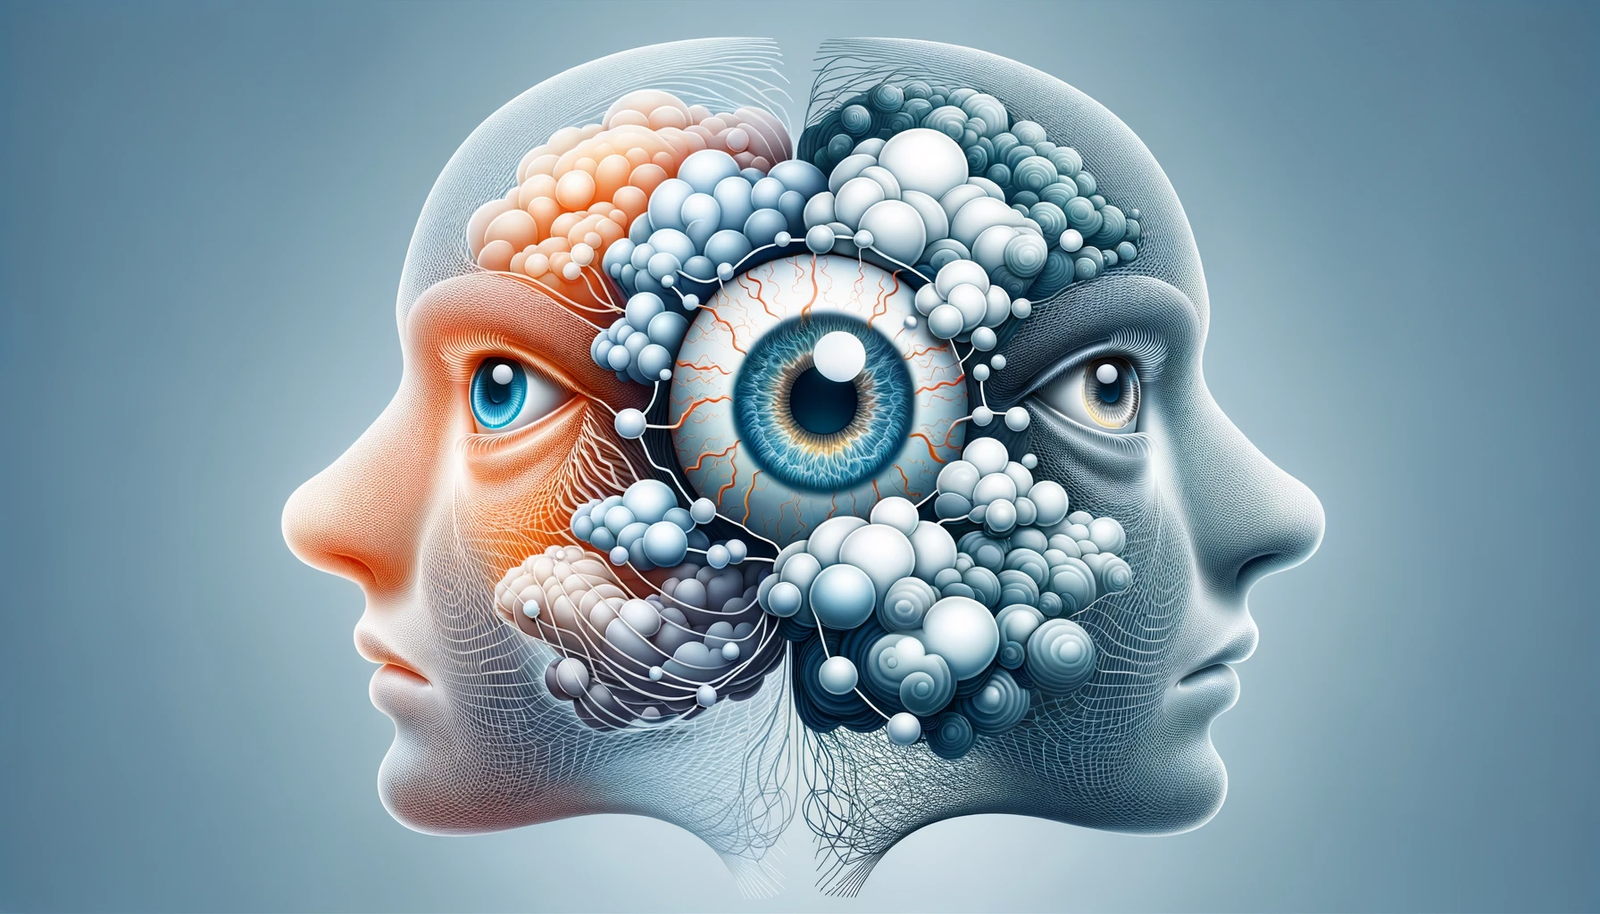 Illustration of two interconnected human profiles, one with a clear eye and the other with a cloudy cataract-affected eye, representing the psychologi